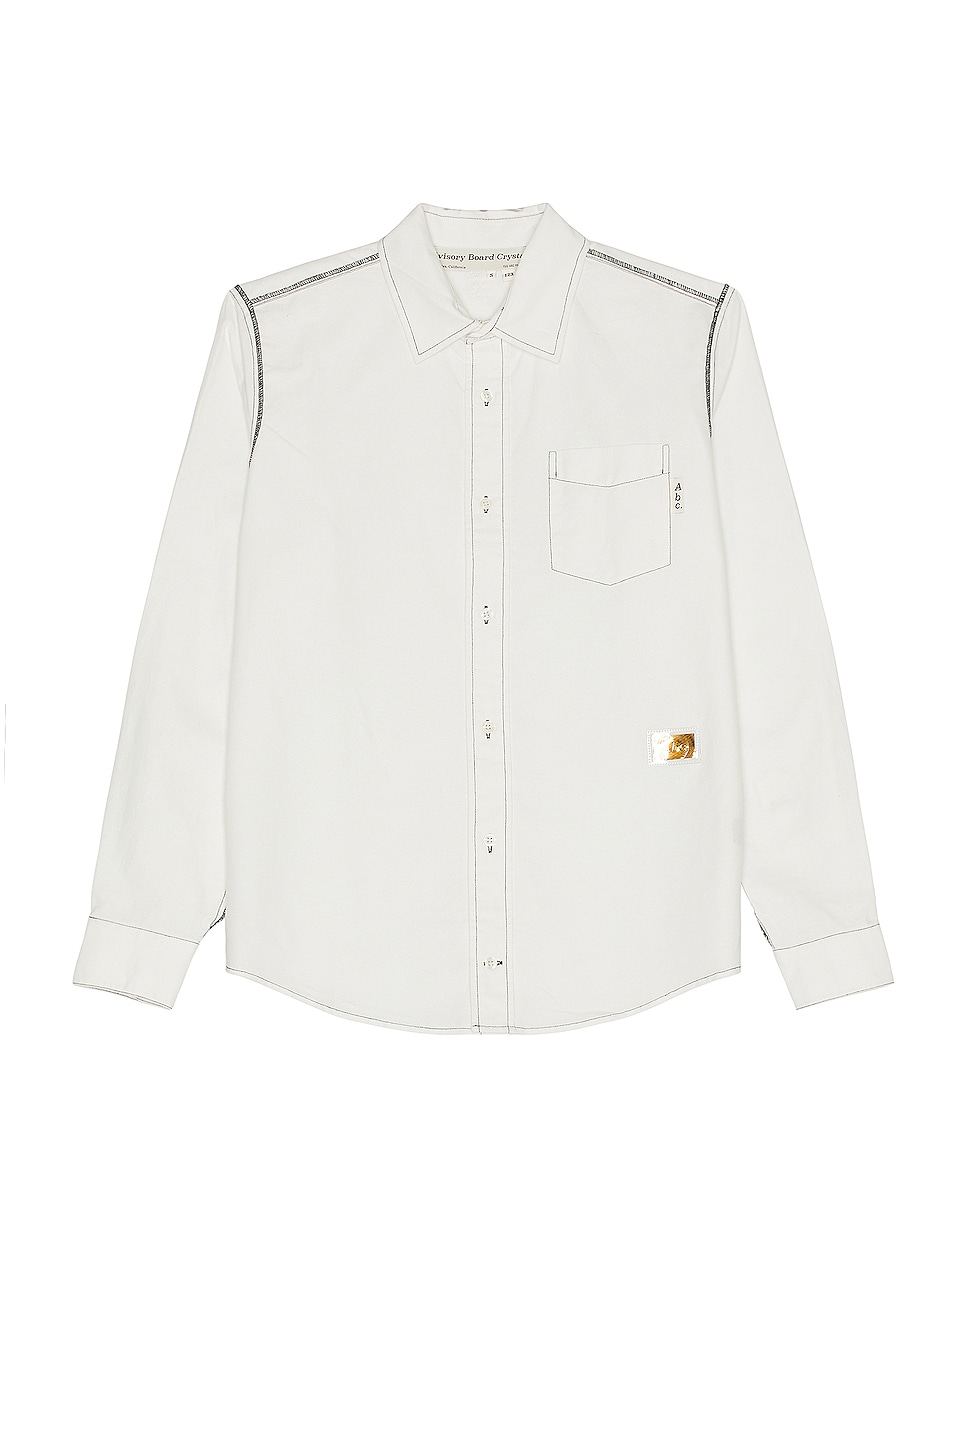 Image 1 of Advisory Board Crystals Oxford Shirt in White